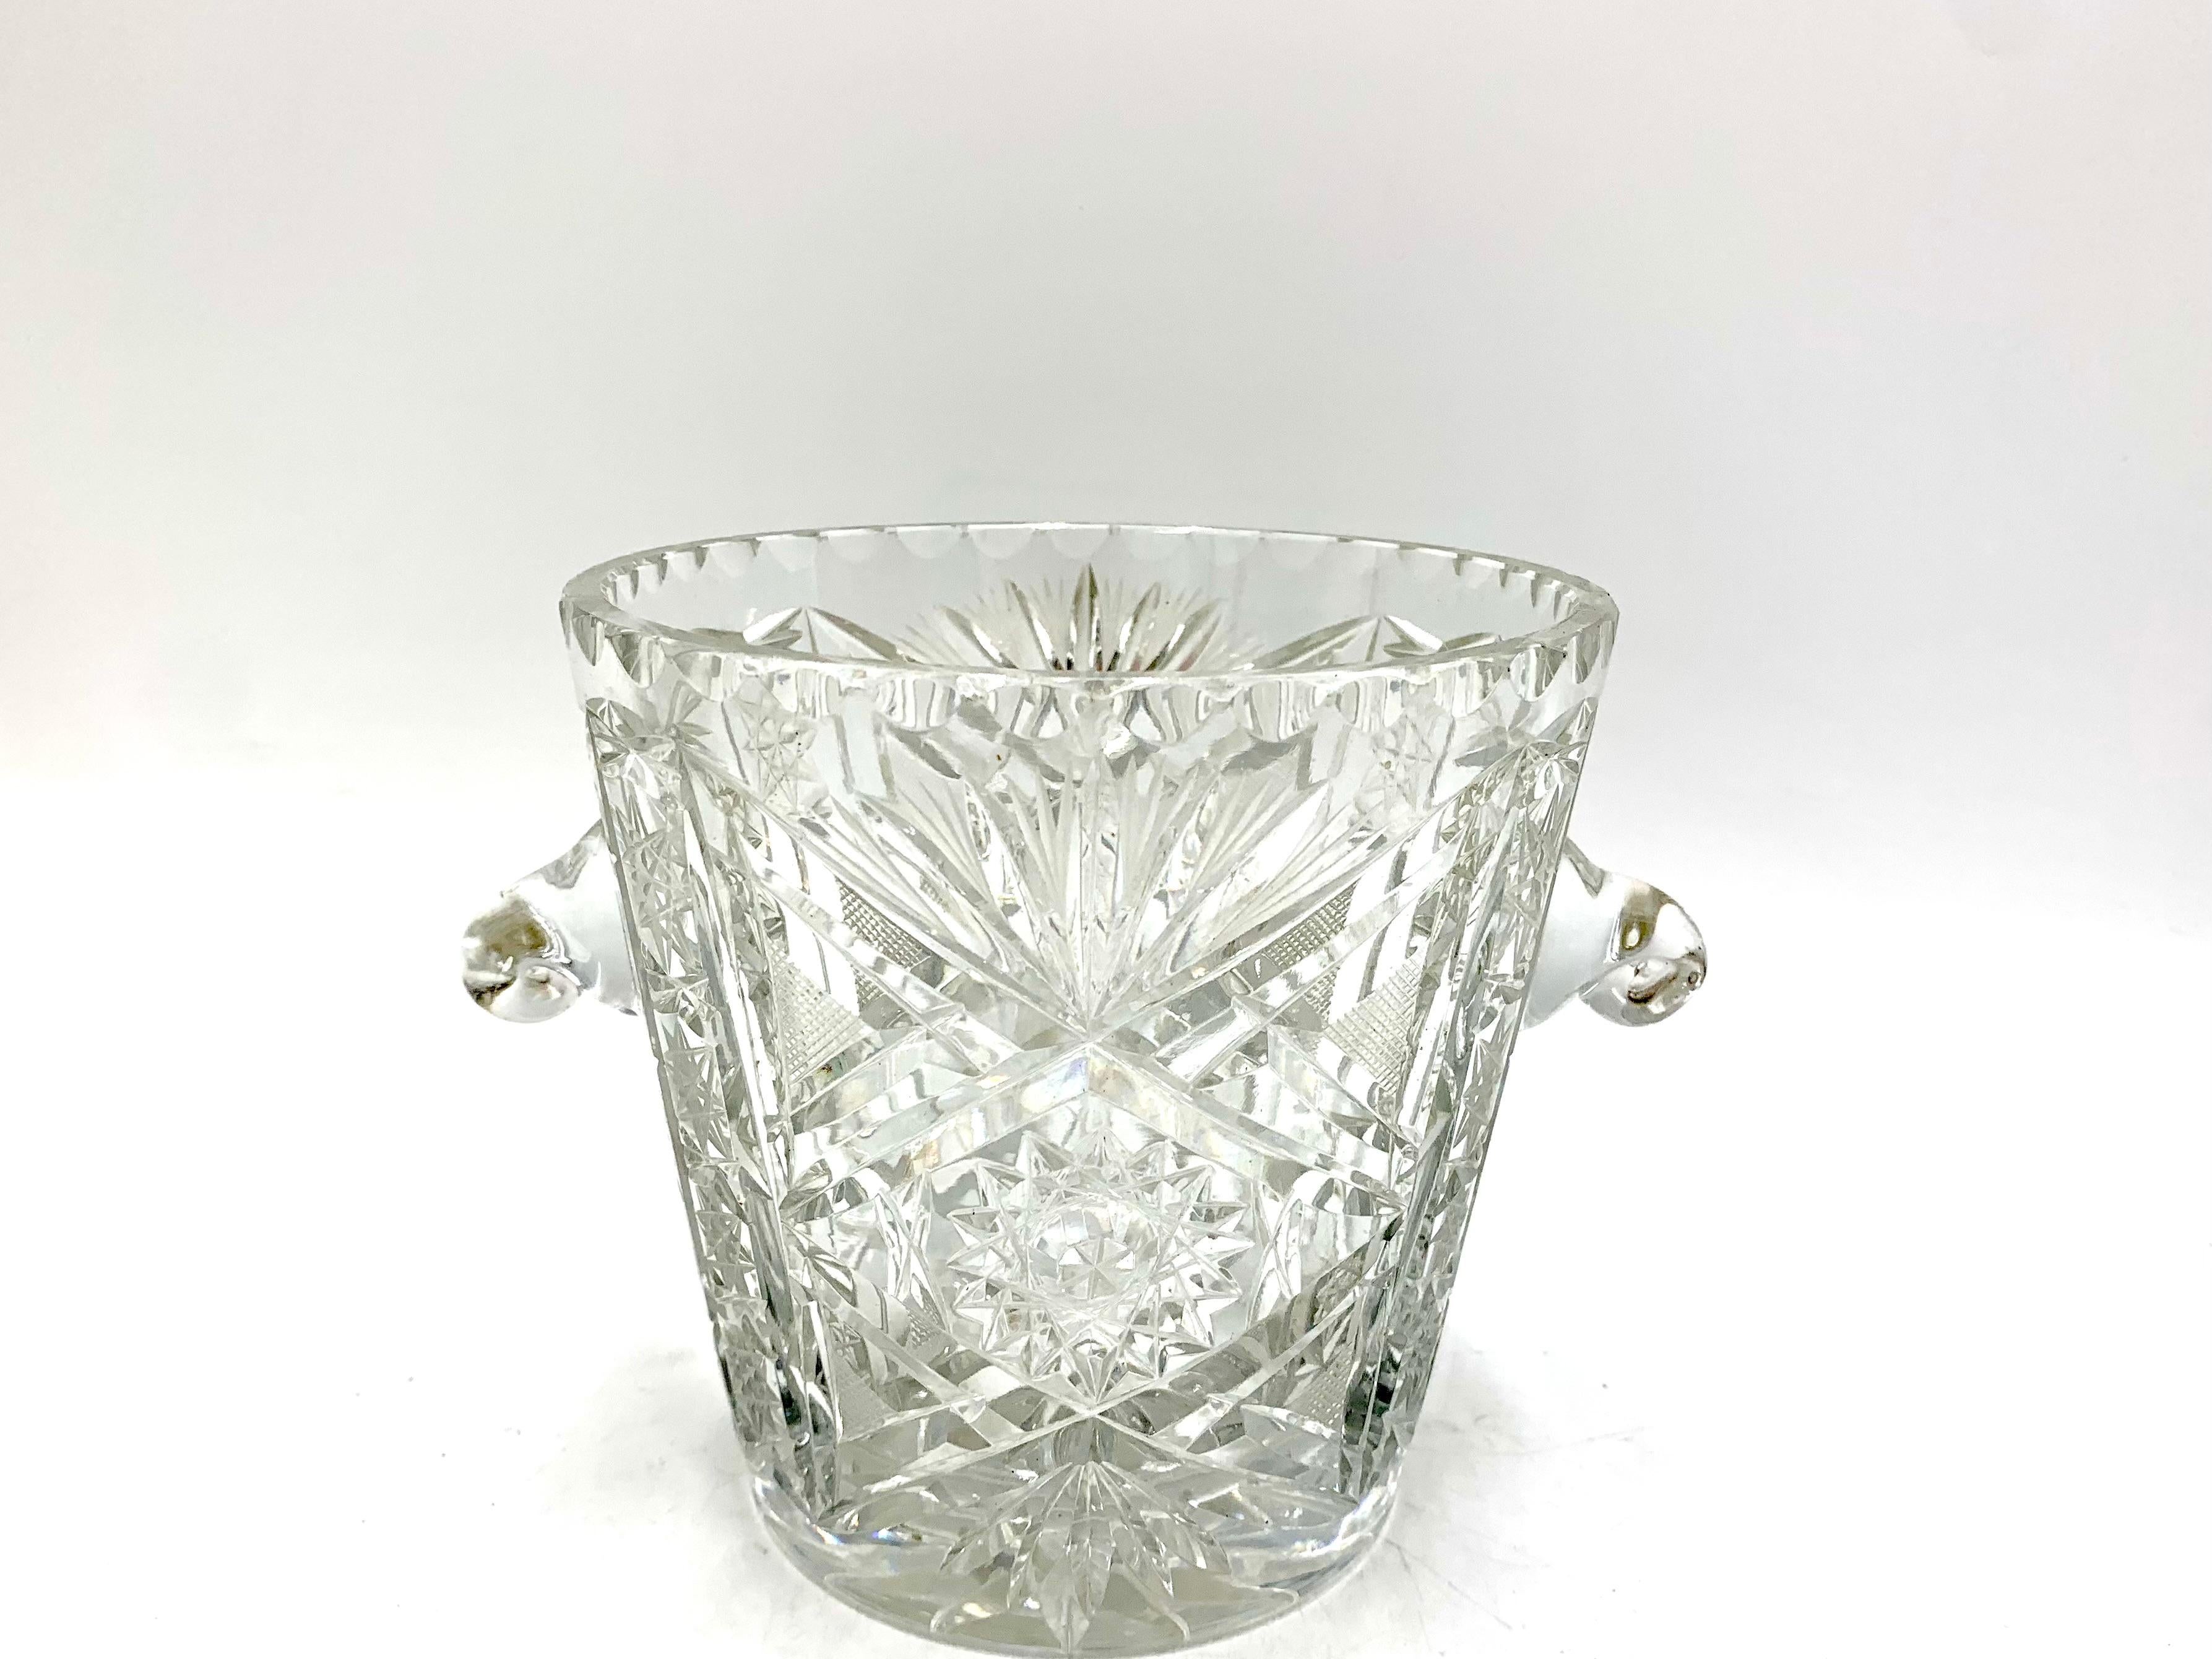 Wine cooler made of crystal 
Produced in Poland in 1960s
Measures: Height 14cm 
Diameter 14cm.